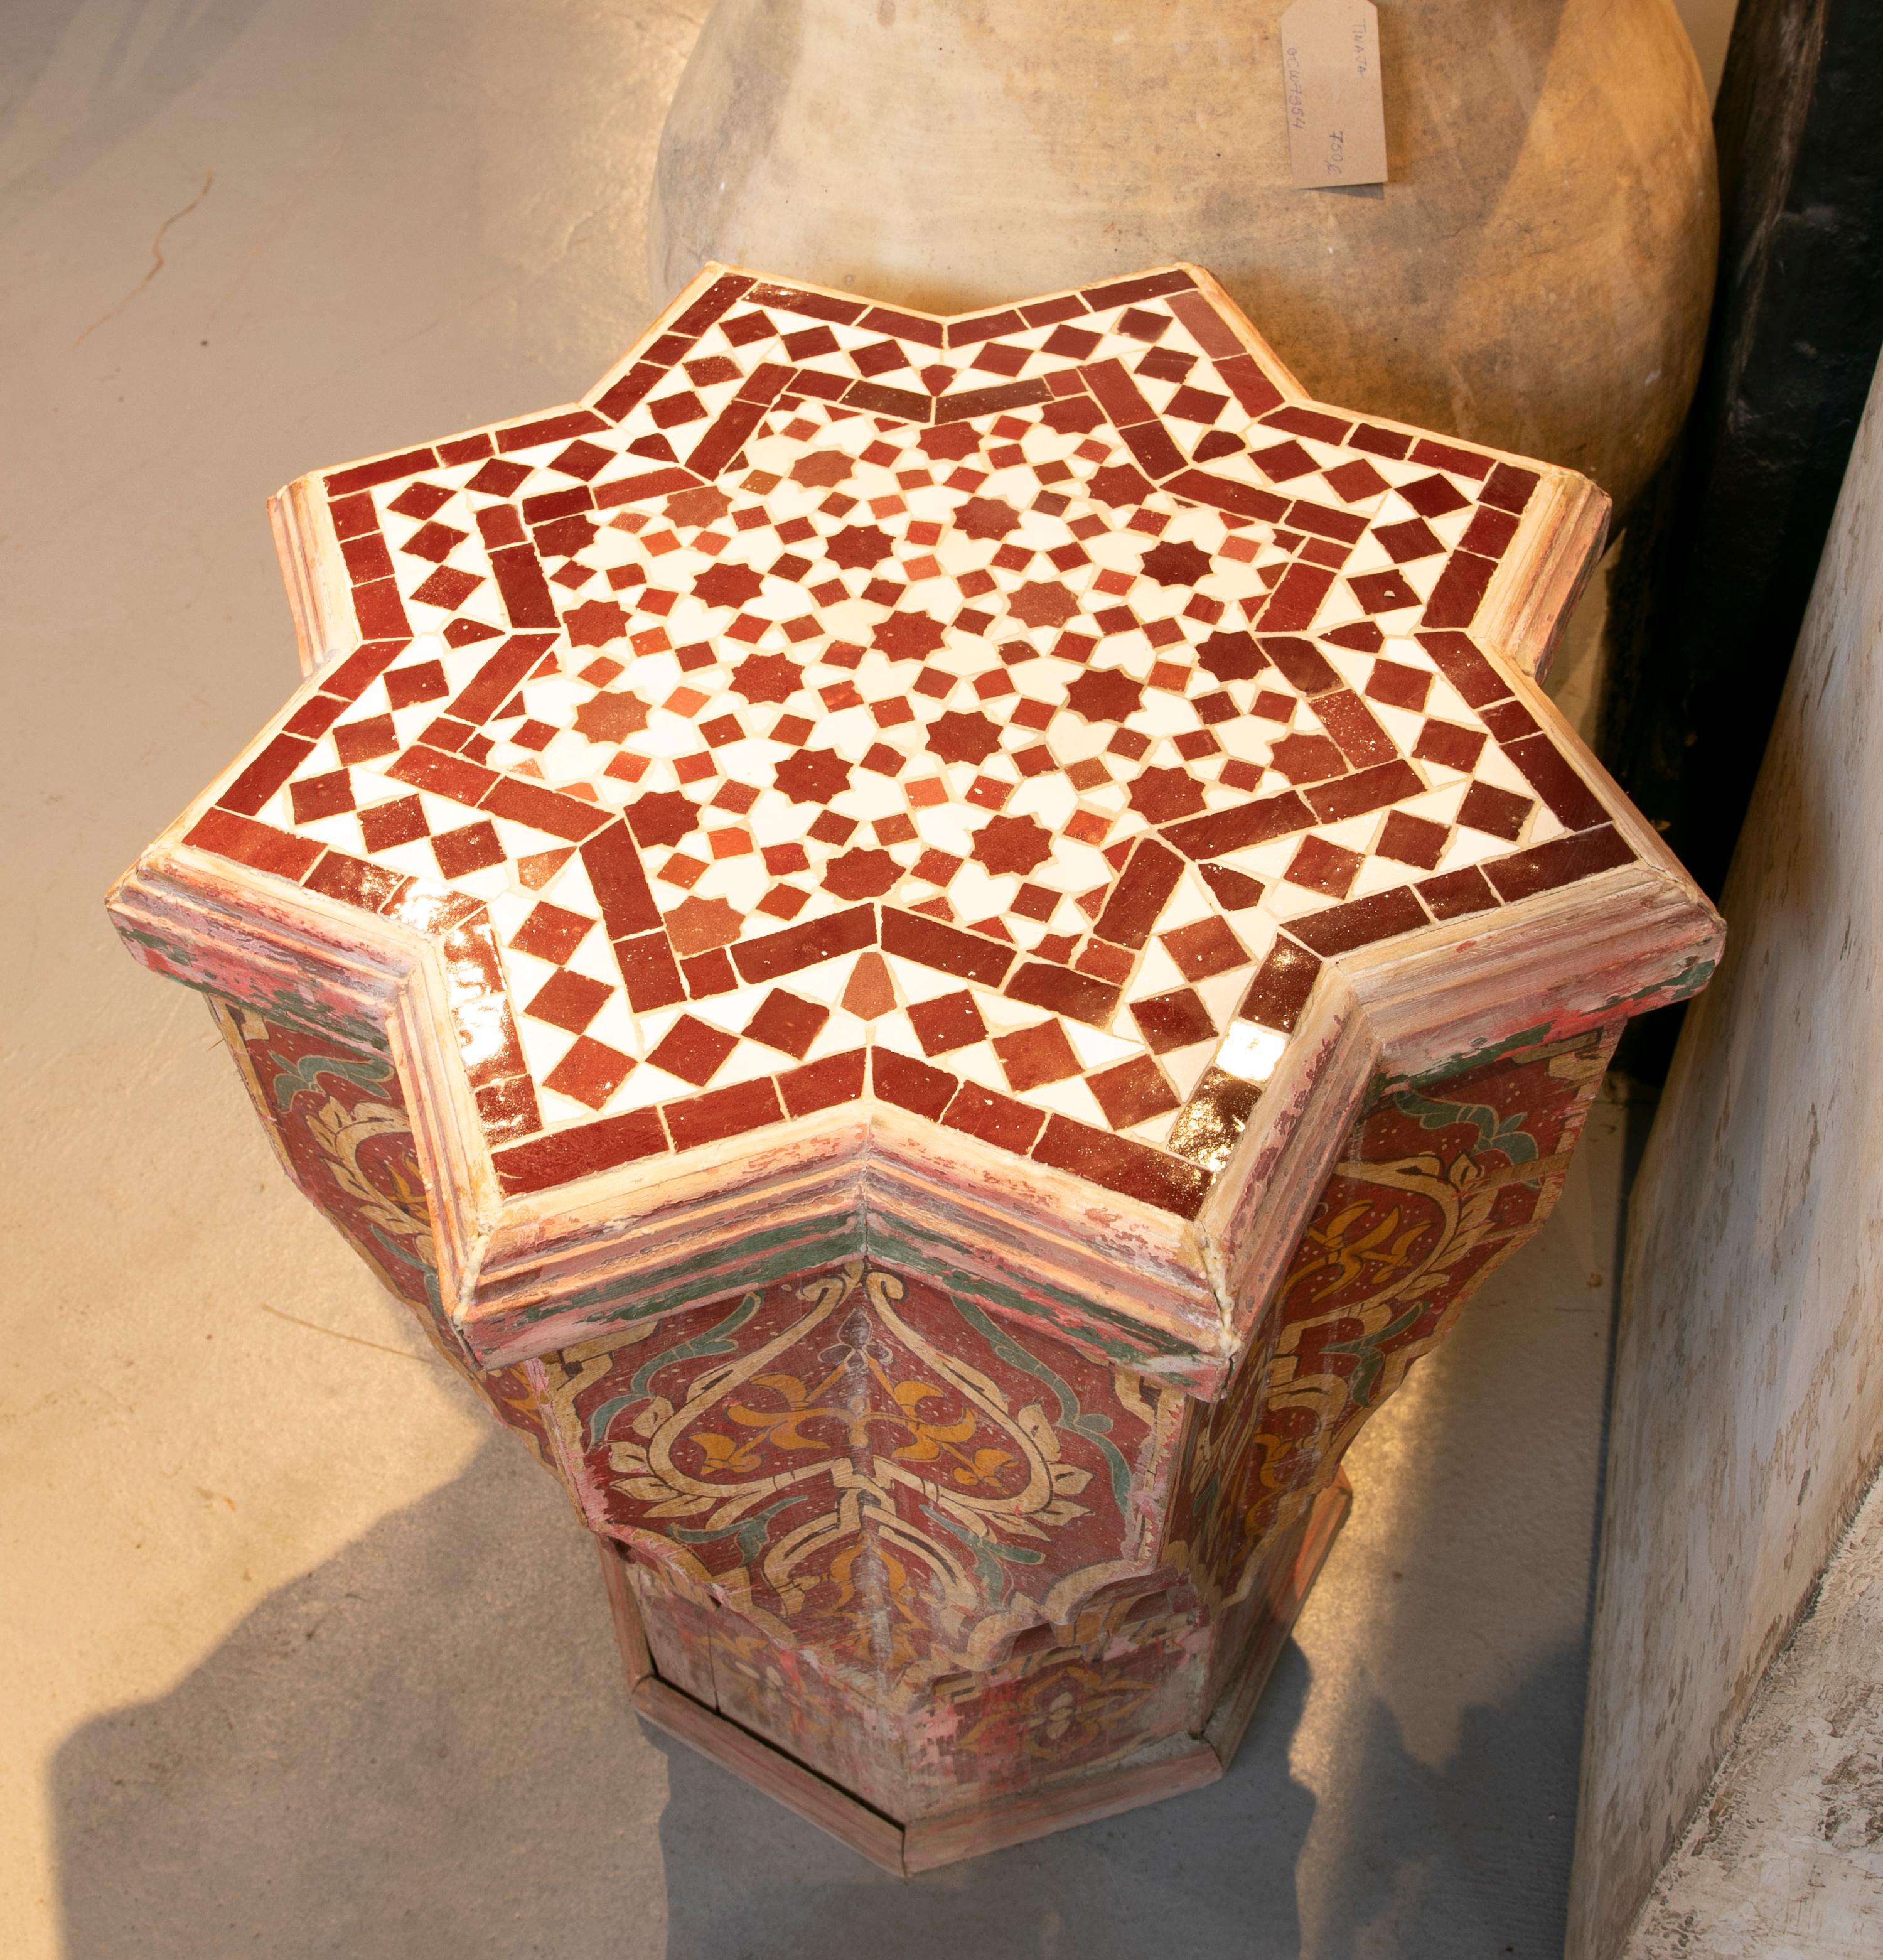 20th Century Polychrome Wooden Side Table with Tiled Top